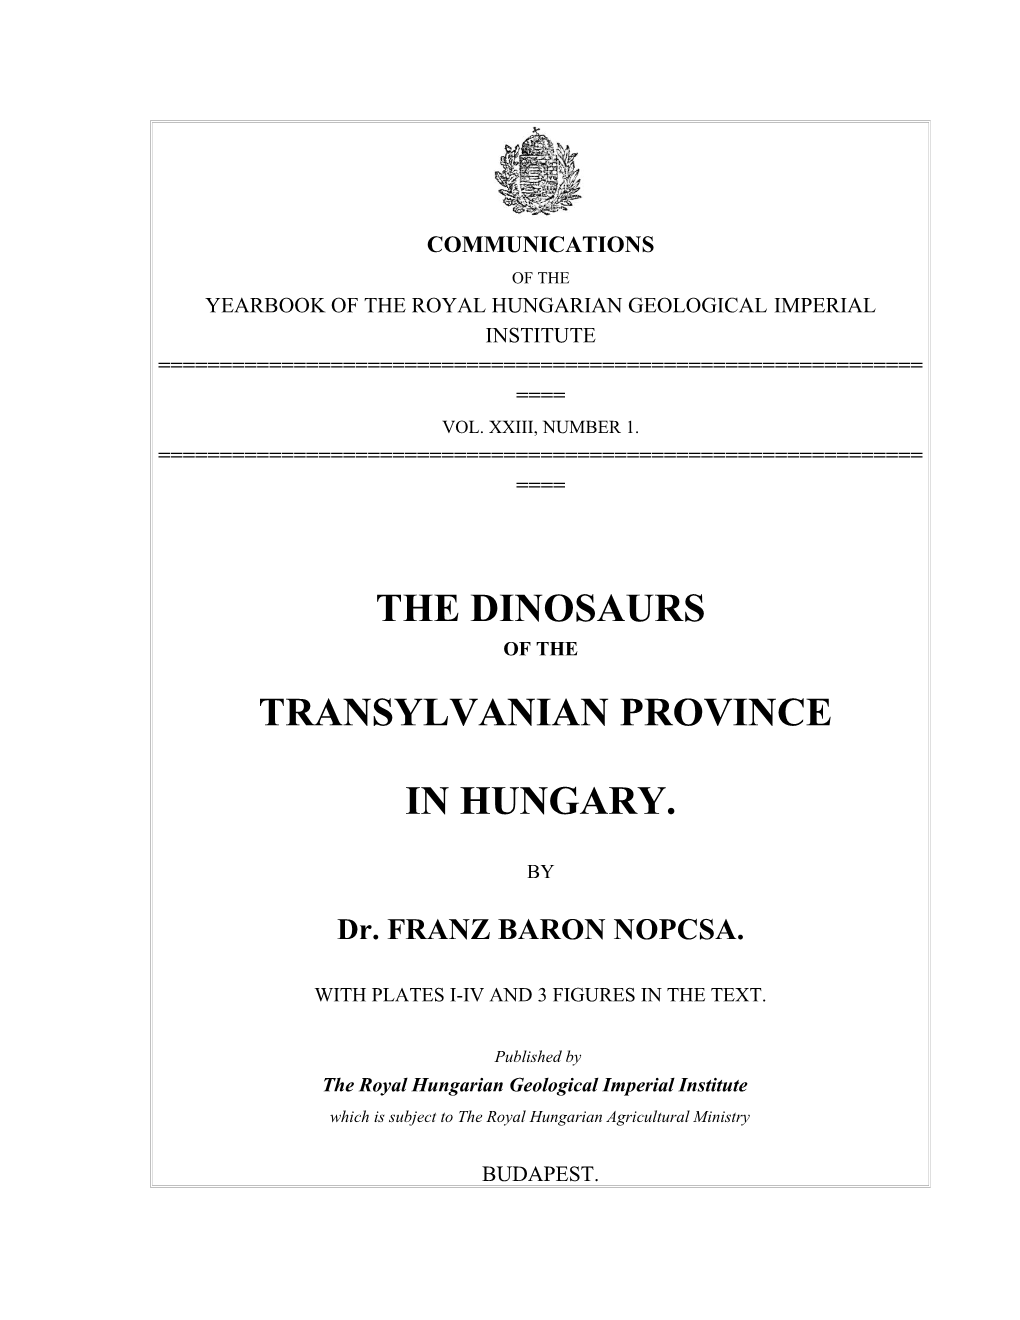 Yearbook of the Royal Hungarian Geologicalimperial Institute